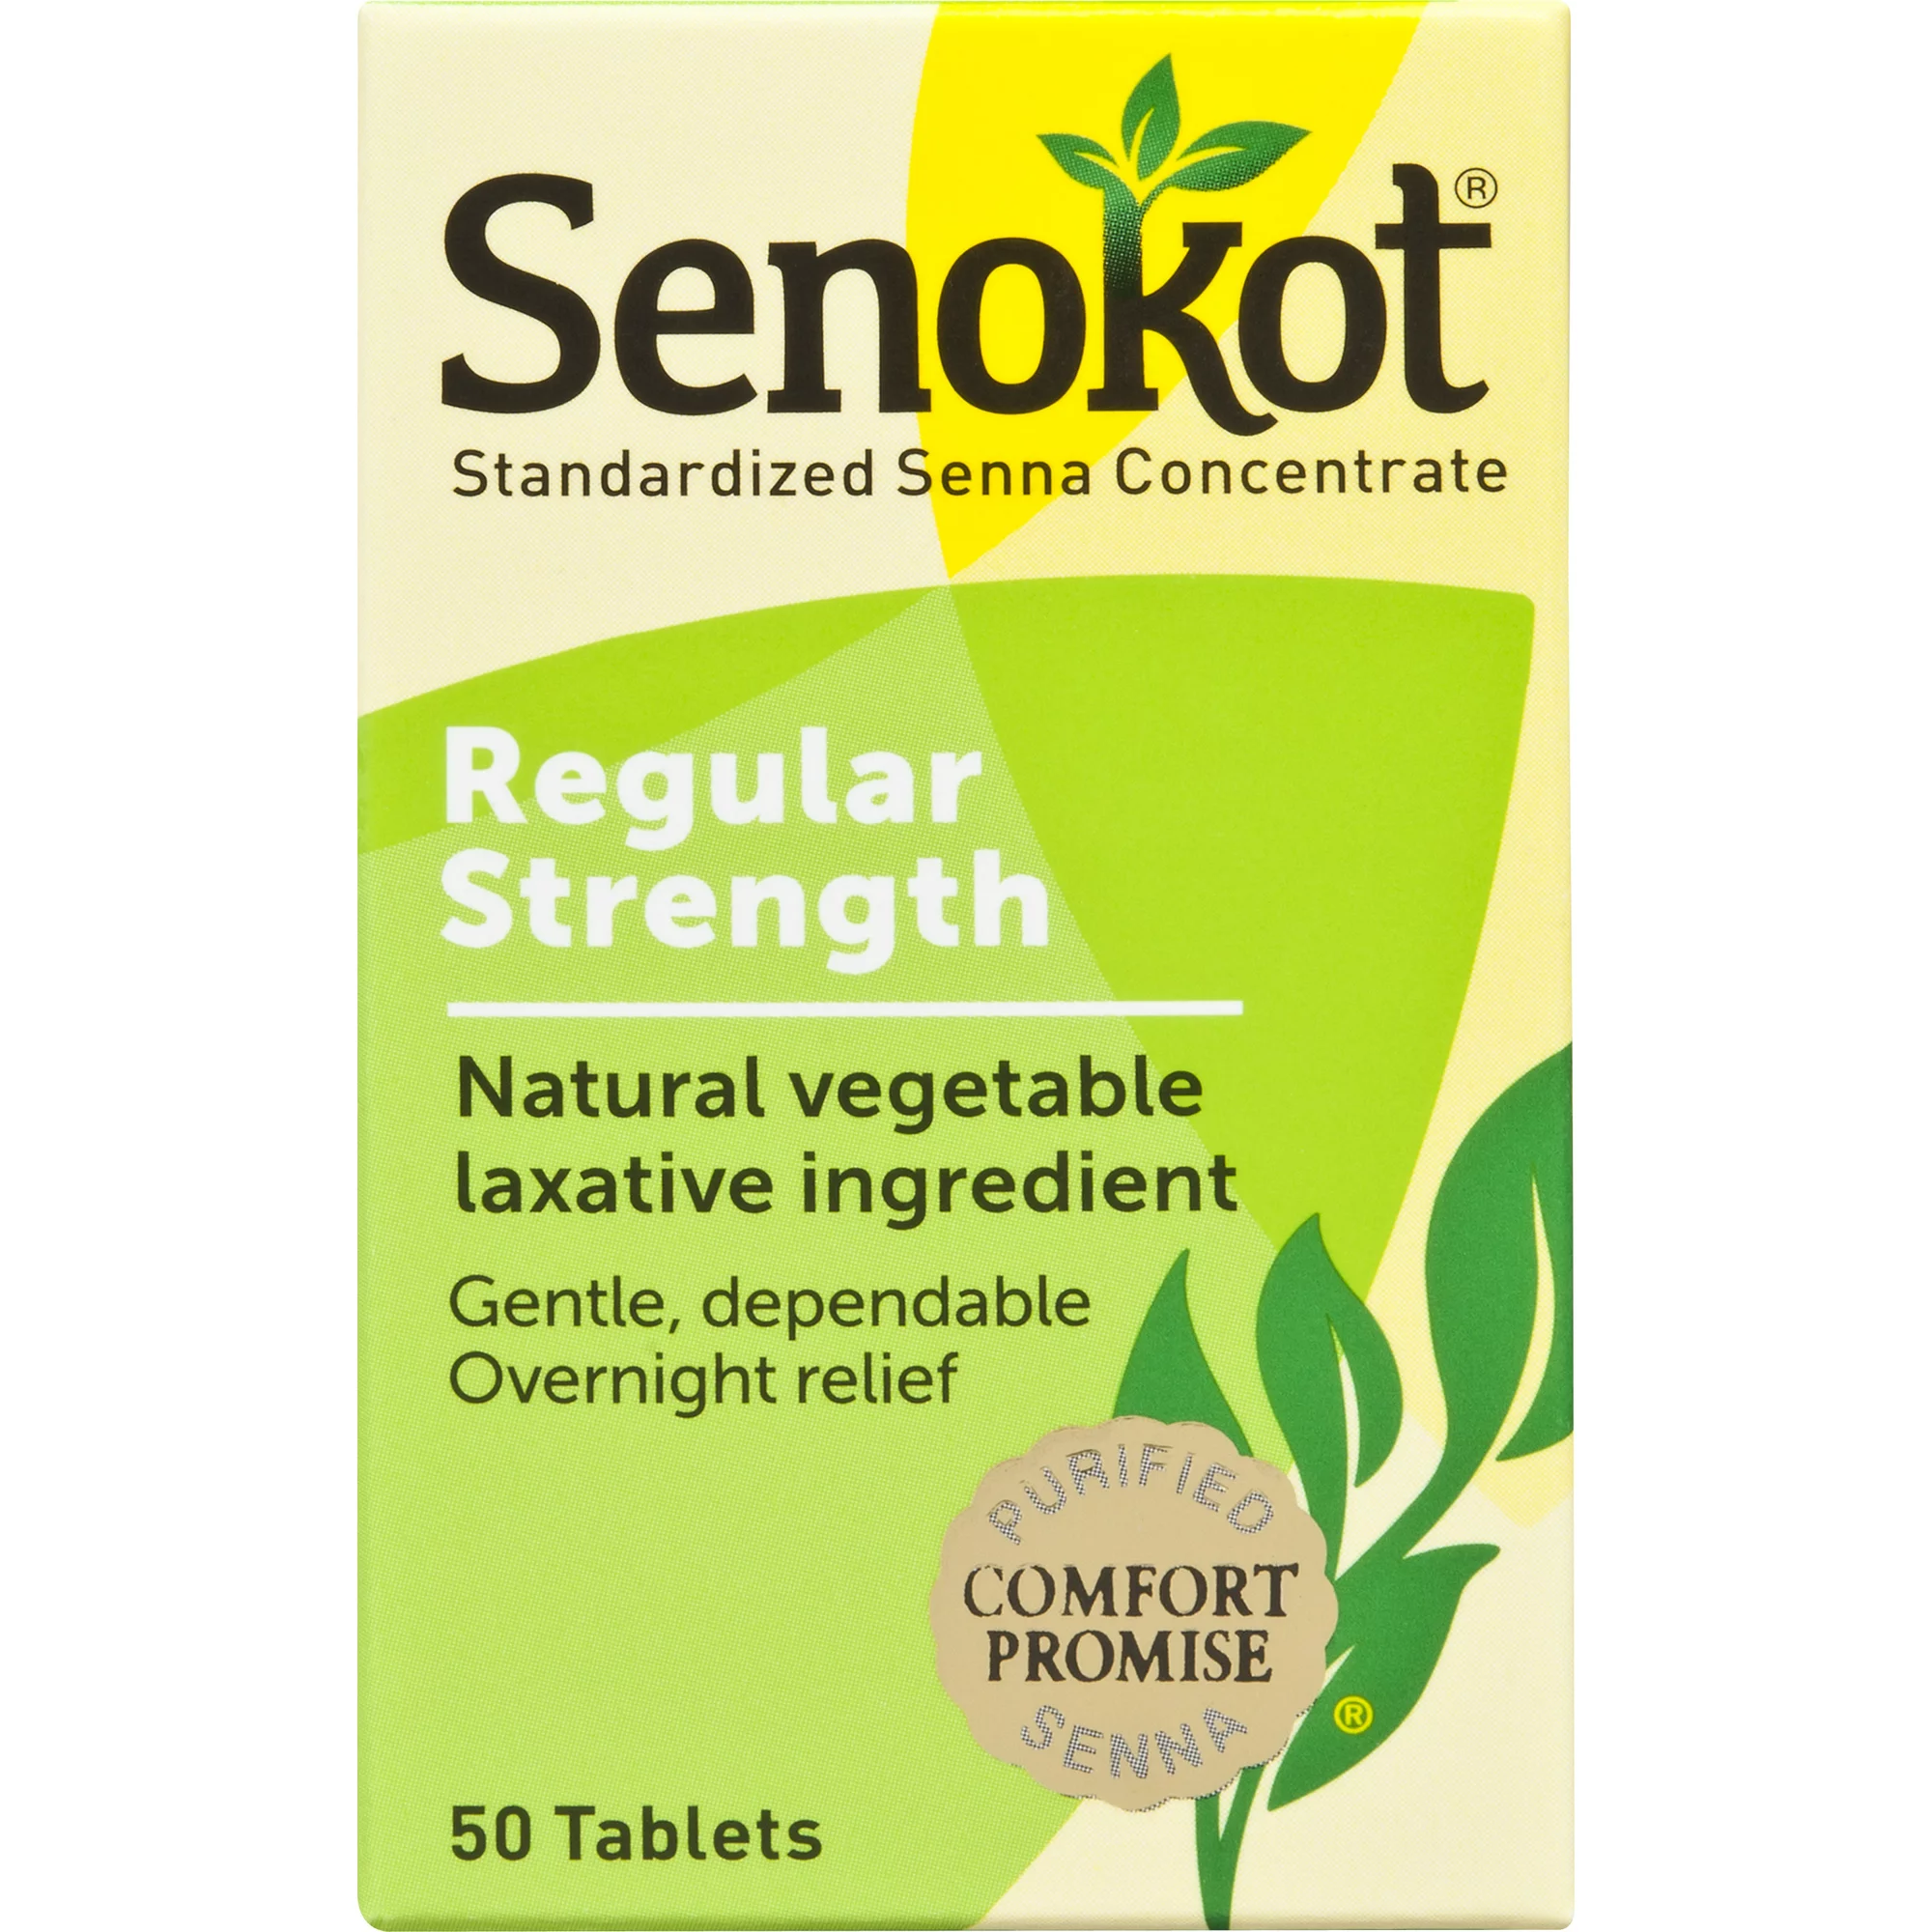 Promote gentle and effective relief using SENOKOT or SENOKOT S Laxative Adult or Kids.